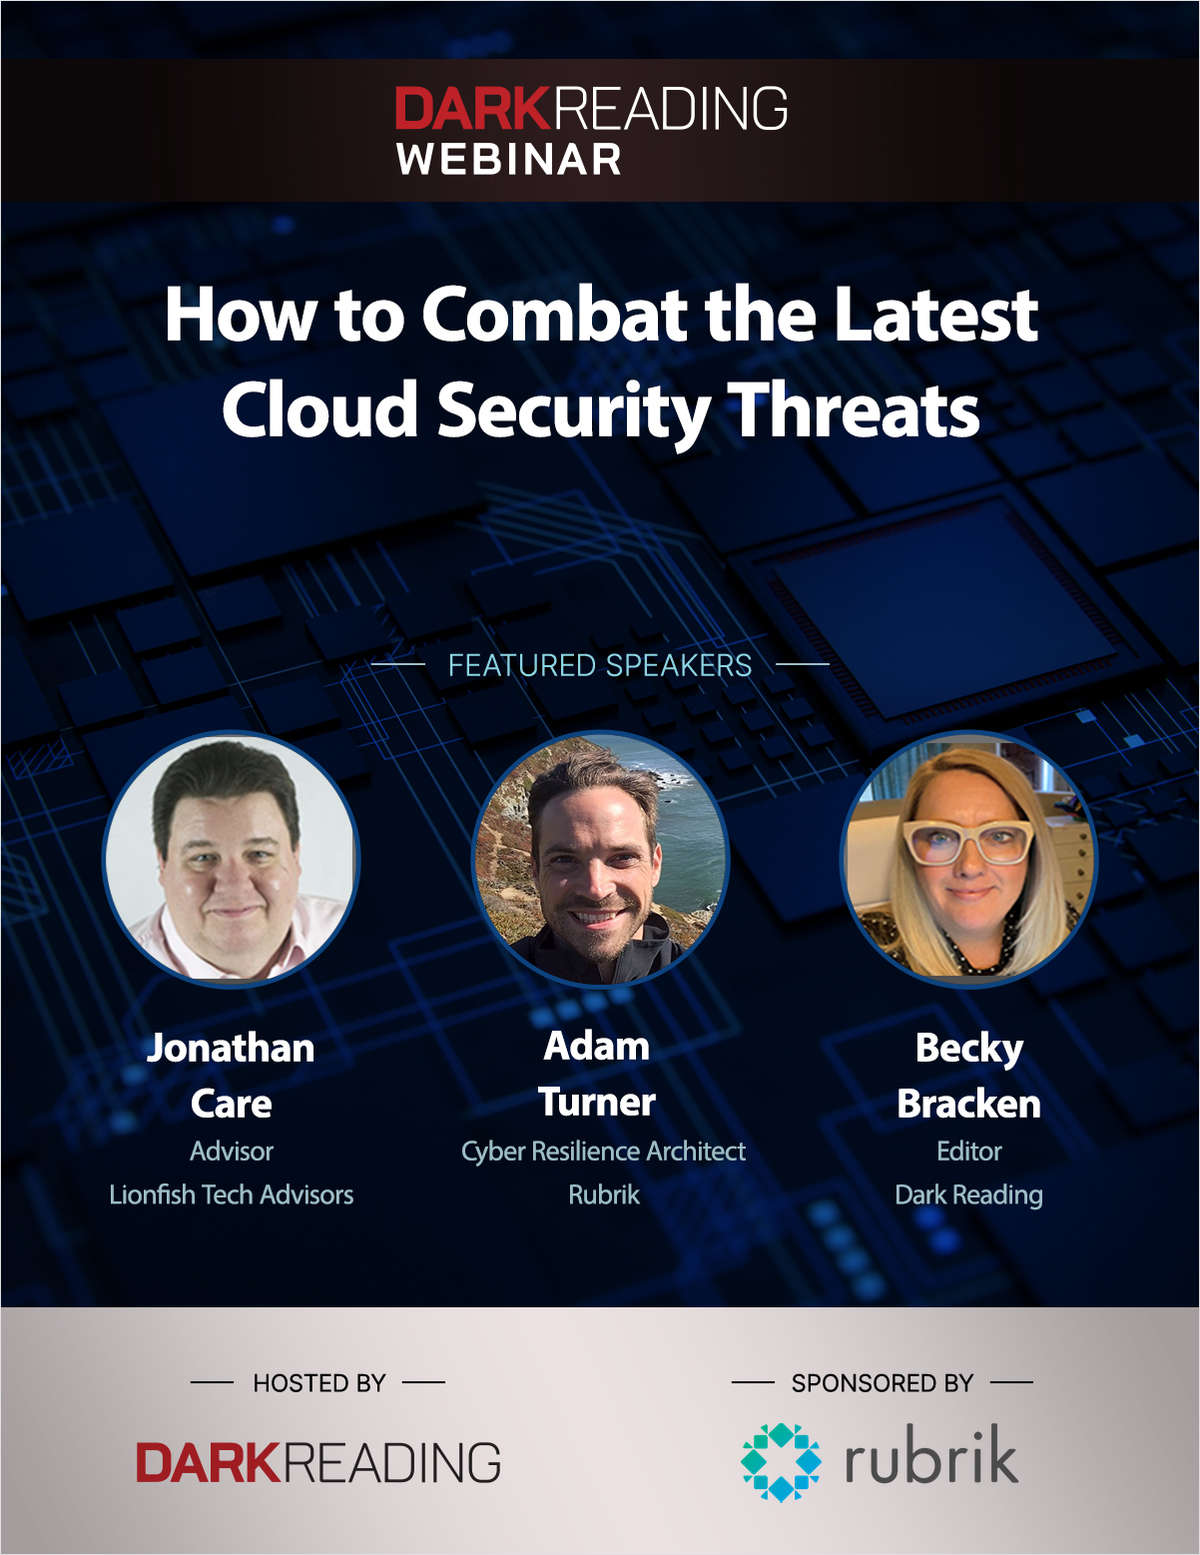 How to Combat the Latest Cloud Security Threats